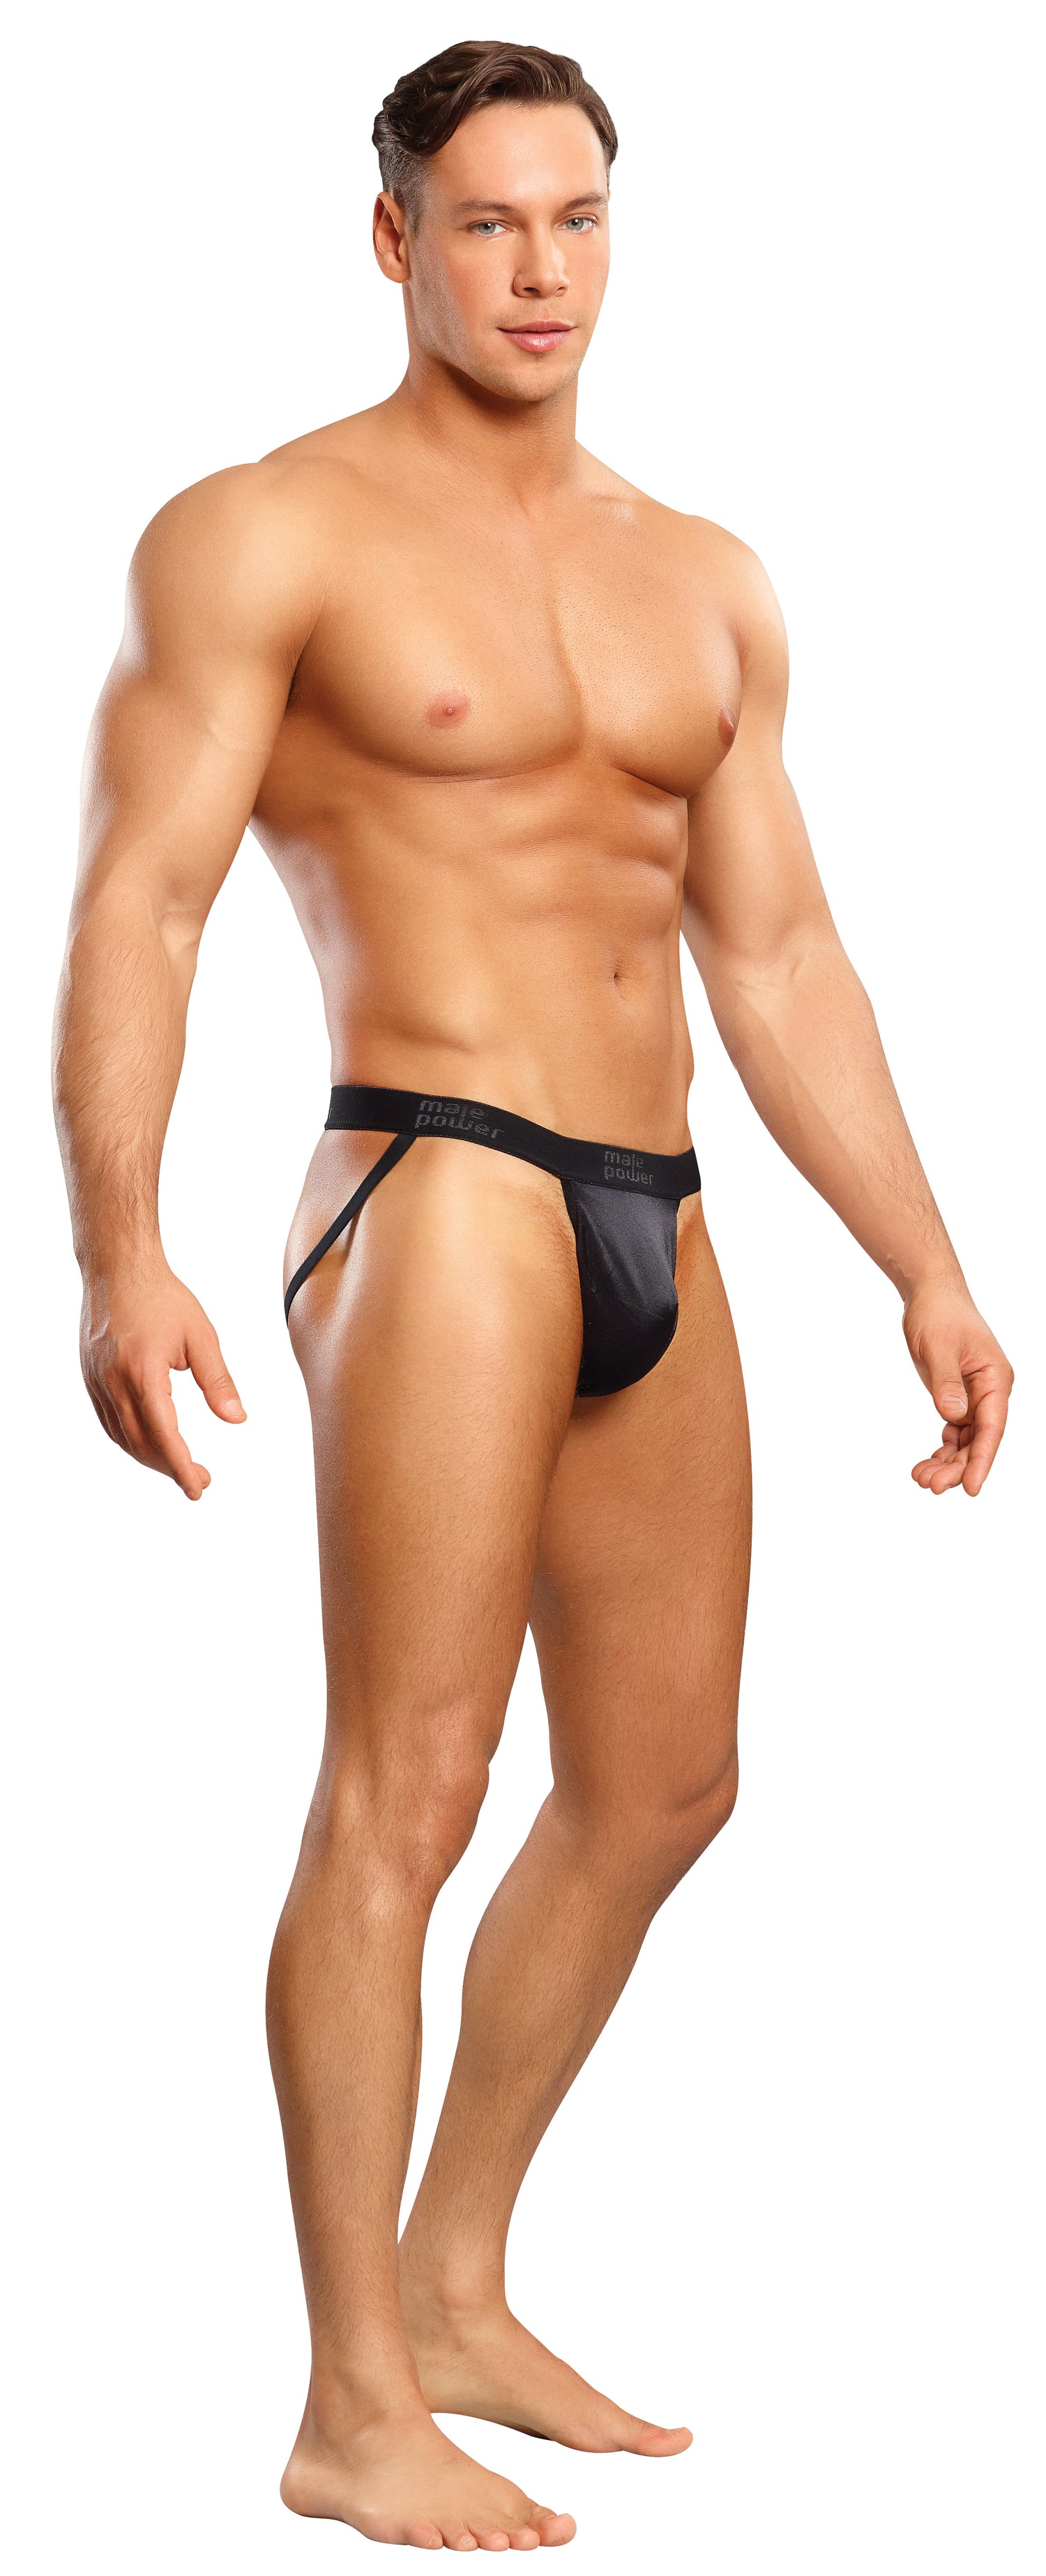 Male Power Jock - Just for you desires